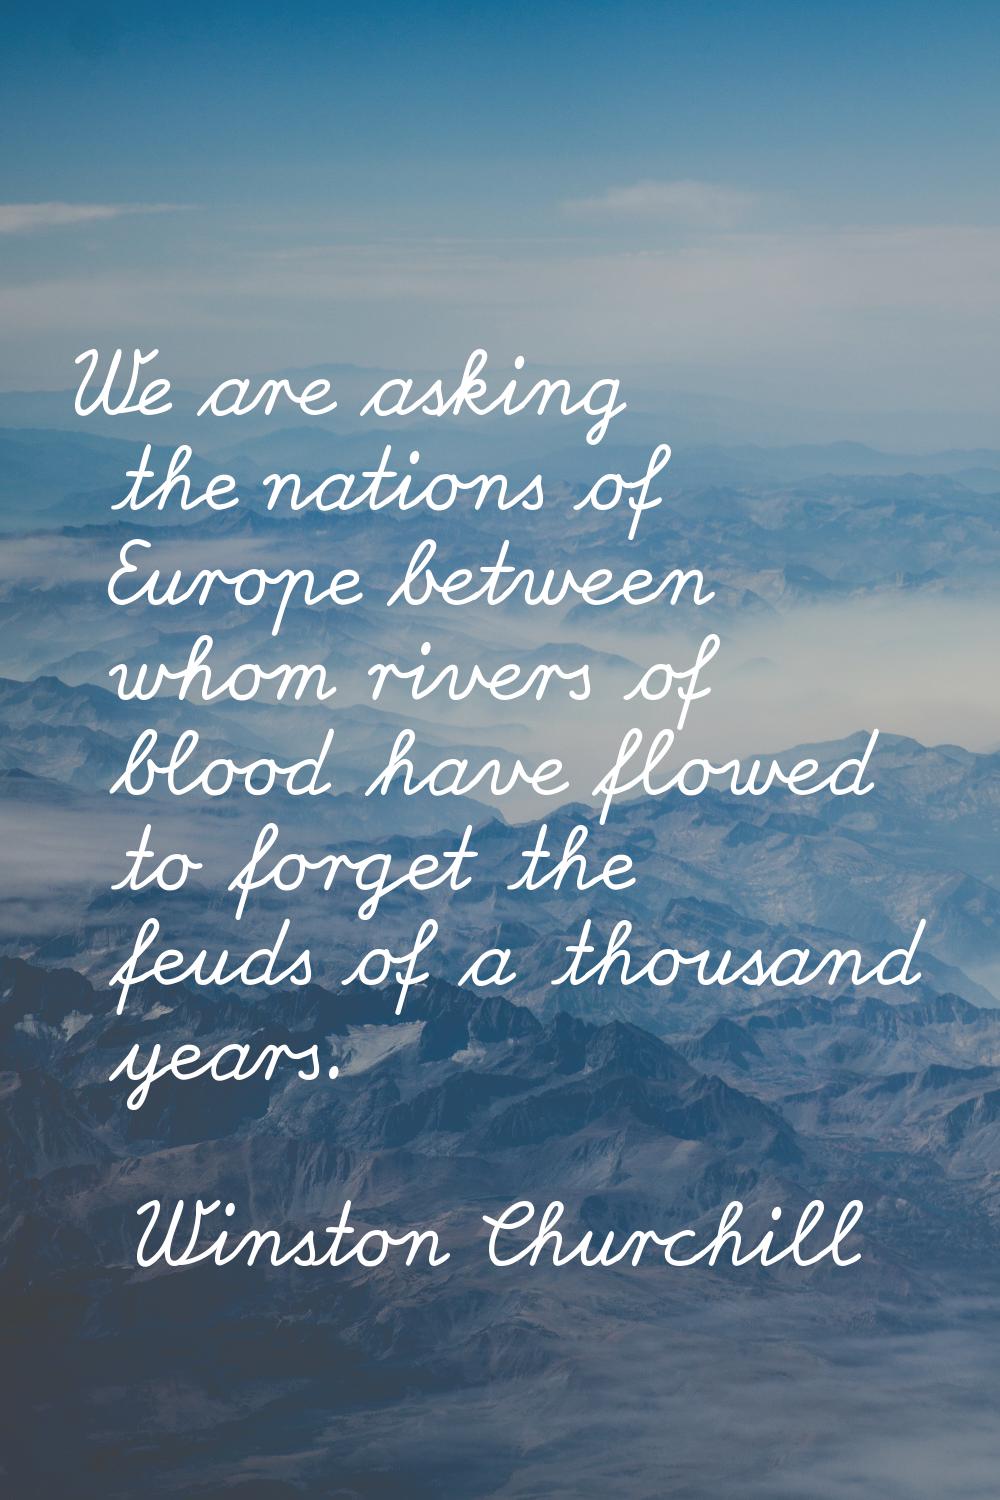 We are asking the nations of Europe between whom rivers of blood have flowed to forget the feuds of